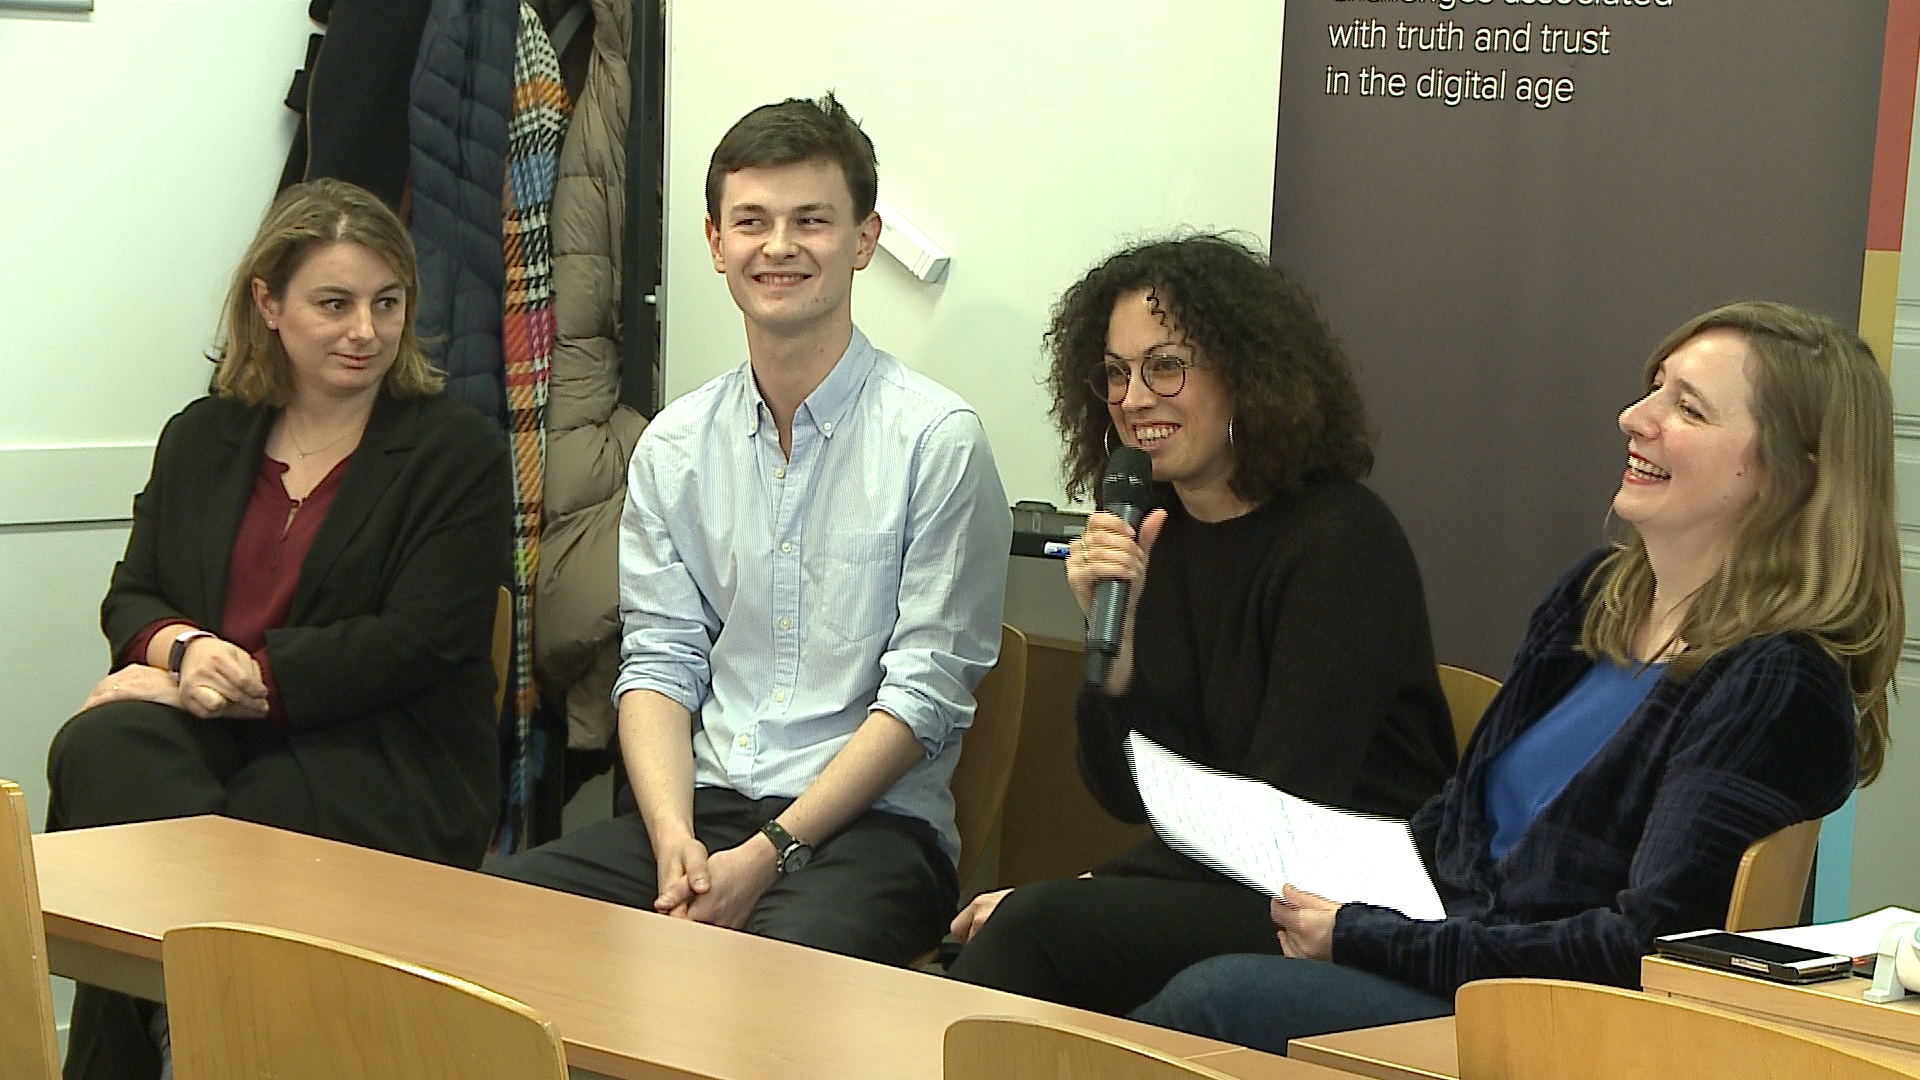 Panelists, Masterclass at Sciences Po Journalism School, March 6th, 2020